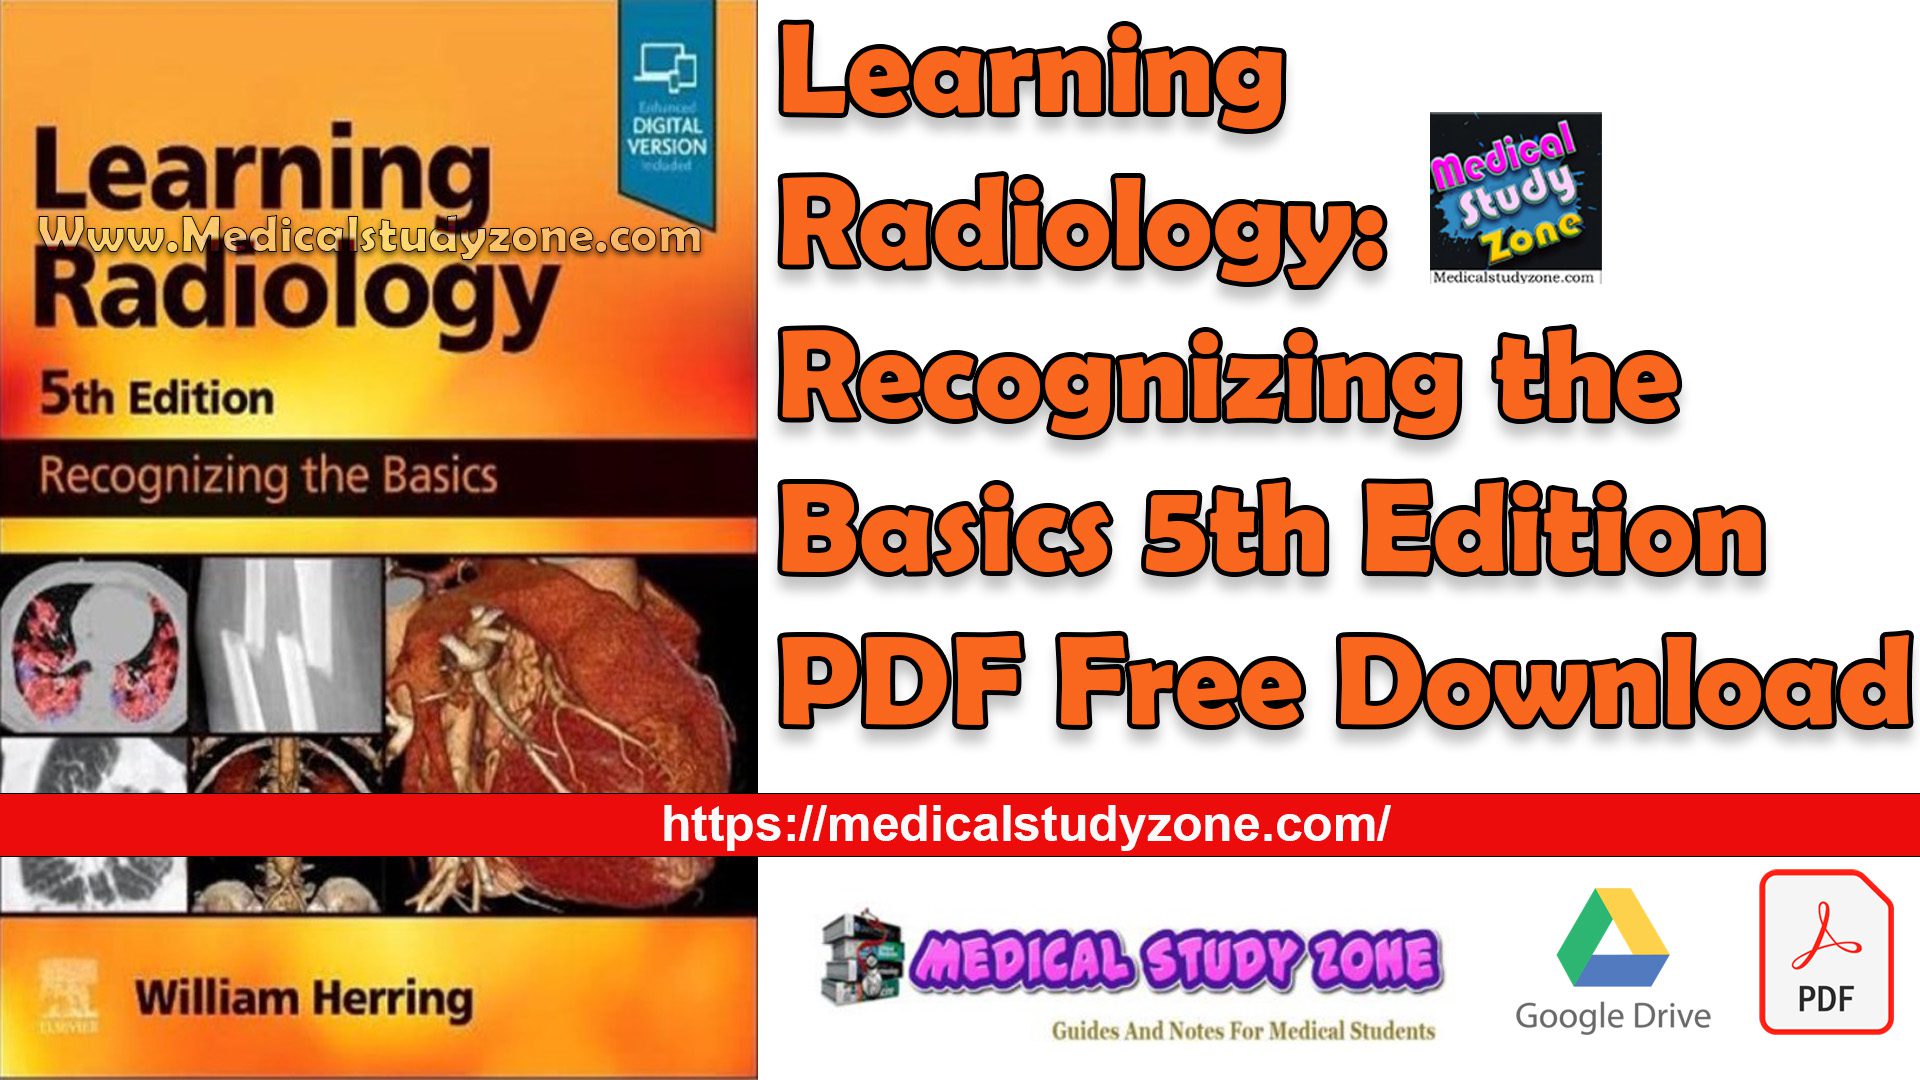 Learning Radiology: Recognizing the Basics 5th Edition PDF Free Download